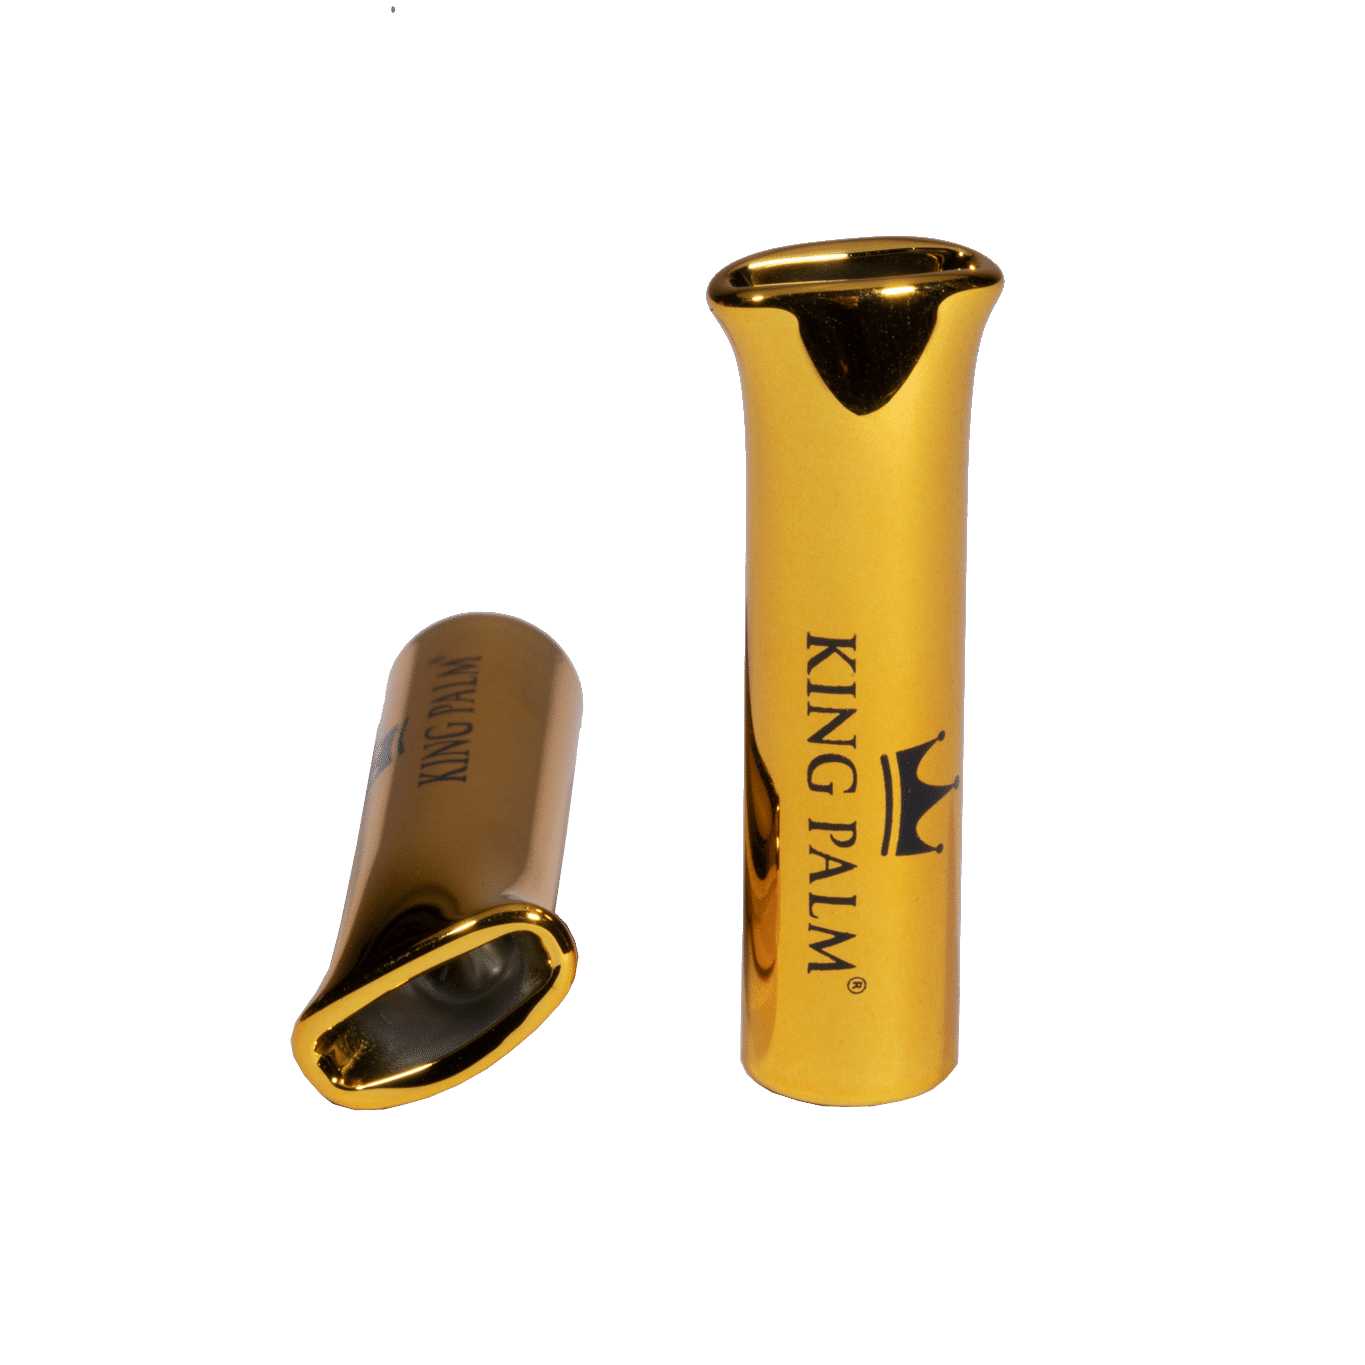 King Palm Glass Filter Tips - Gold - - Glass Filter Tips - King Palm - Cali Tobacconist